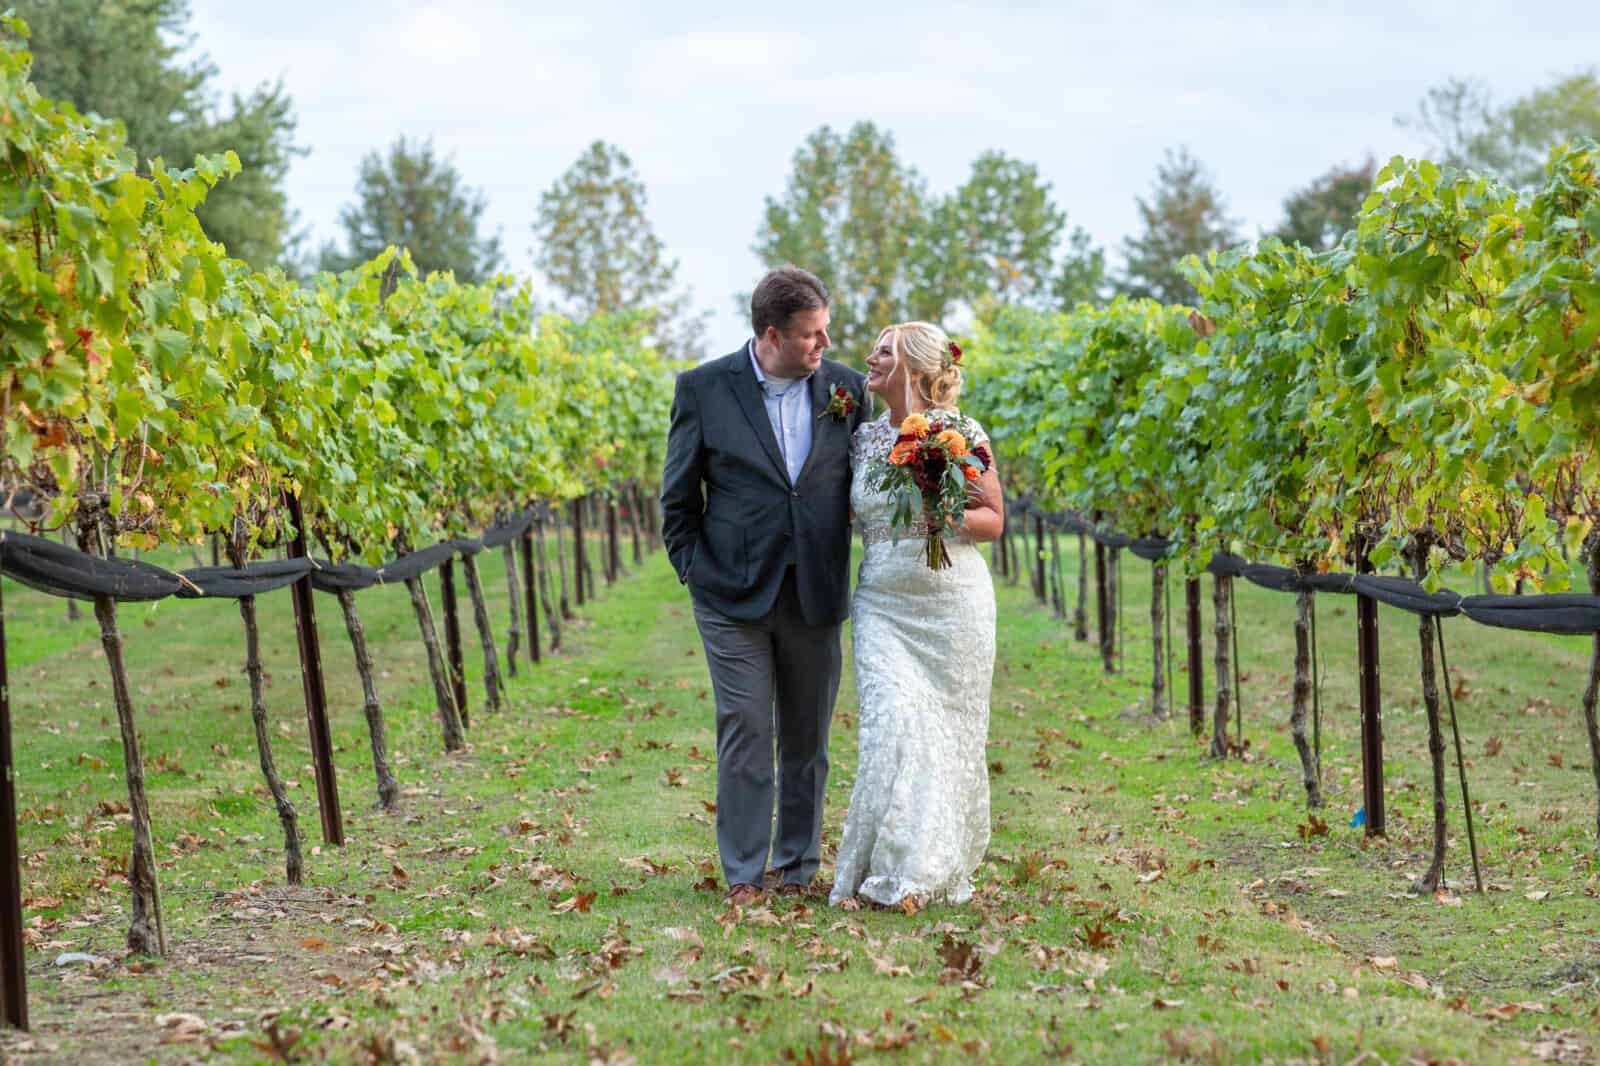 Bride and groom walk down middle of vineyard row with arms around each other.